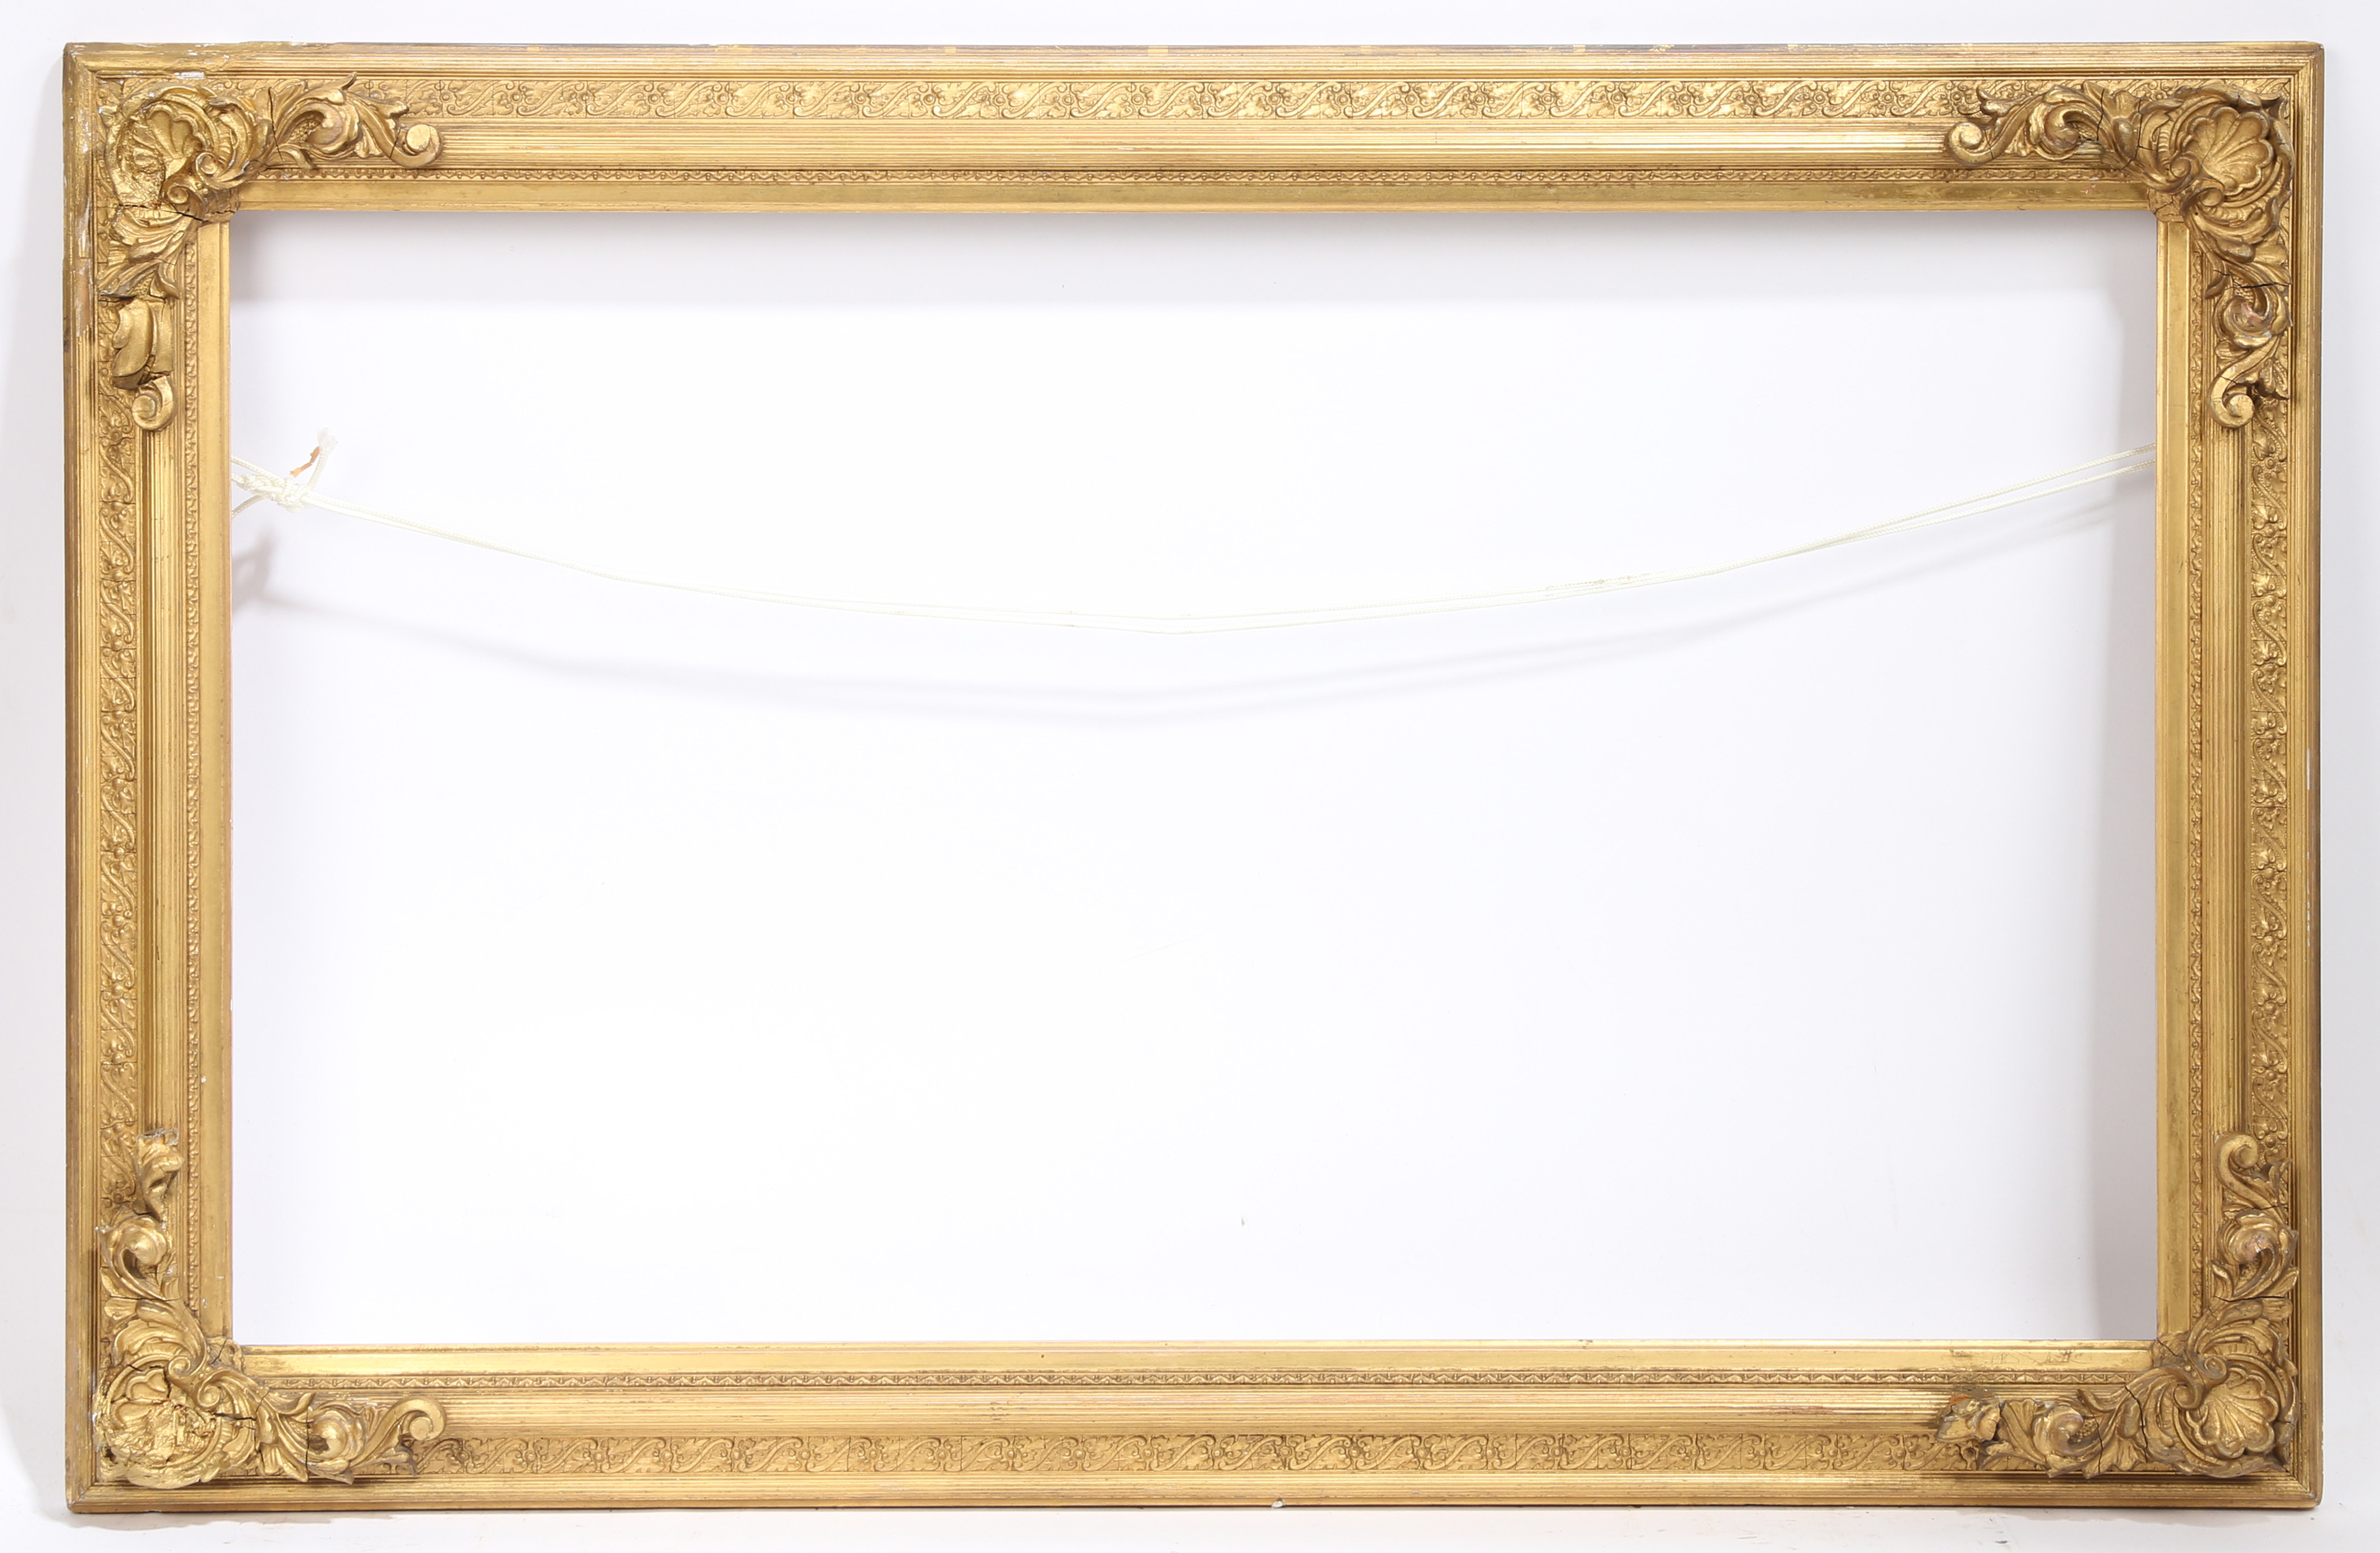 19th century English watercolour frame with corners - rebate size 29in x 17in - Image 3 of 3